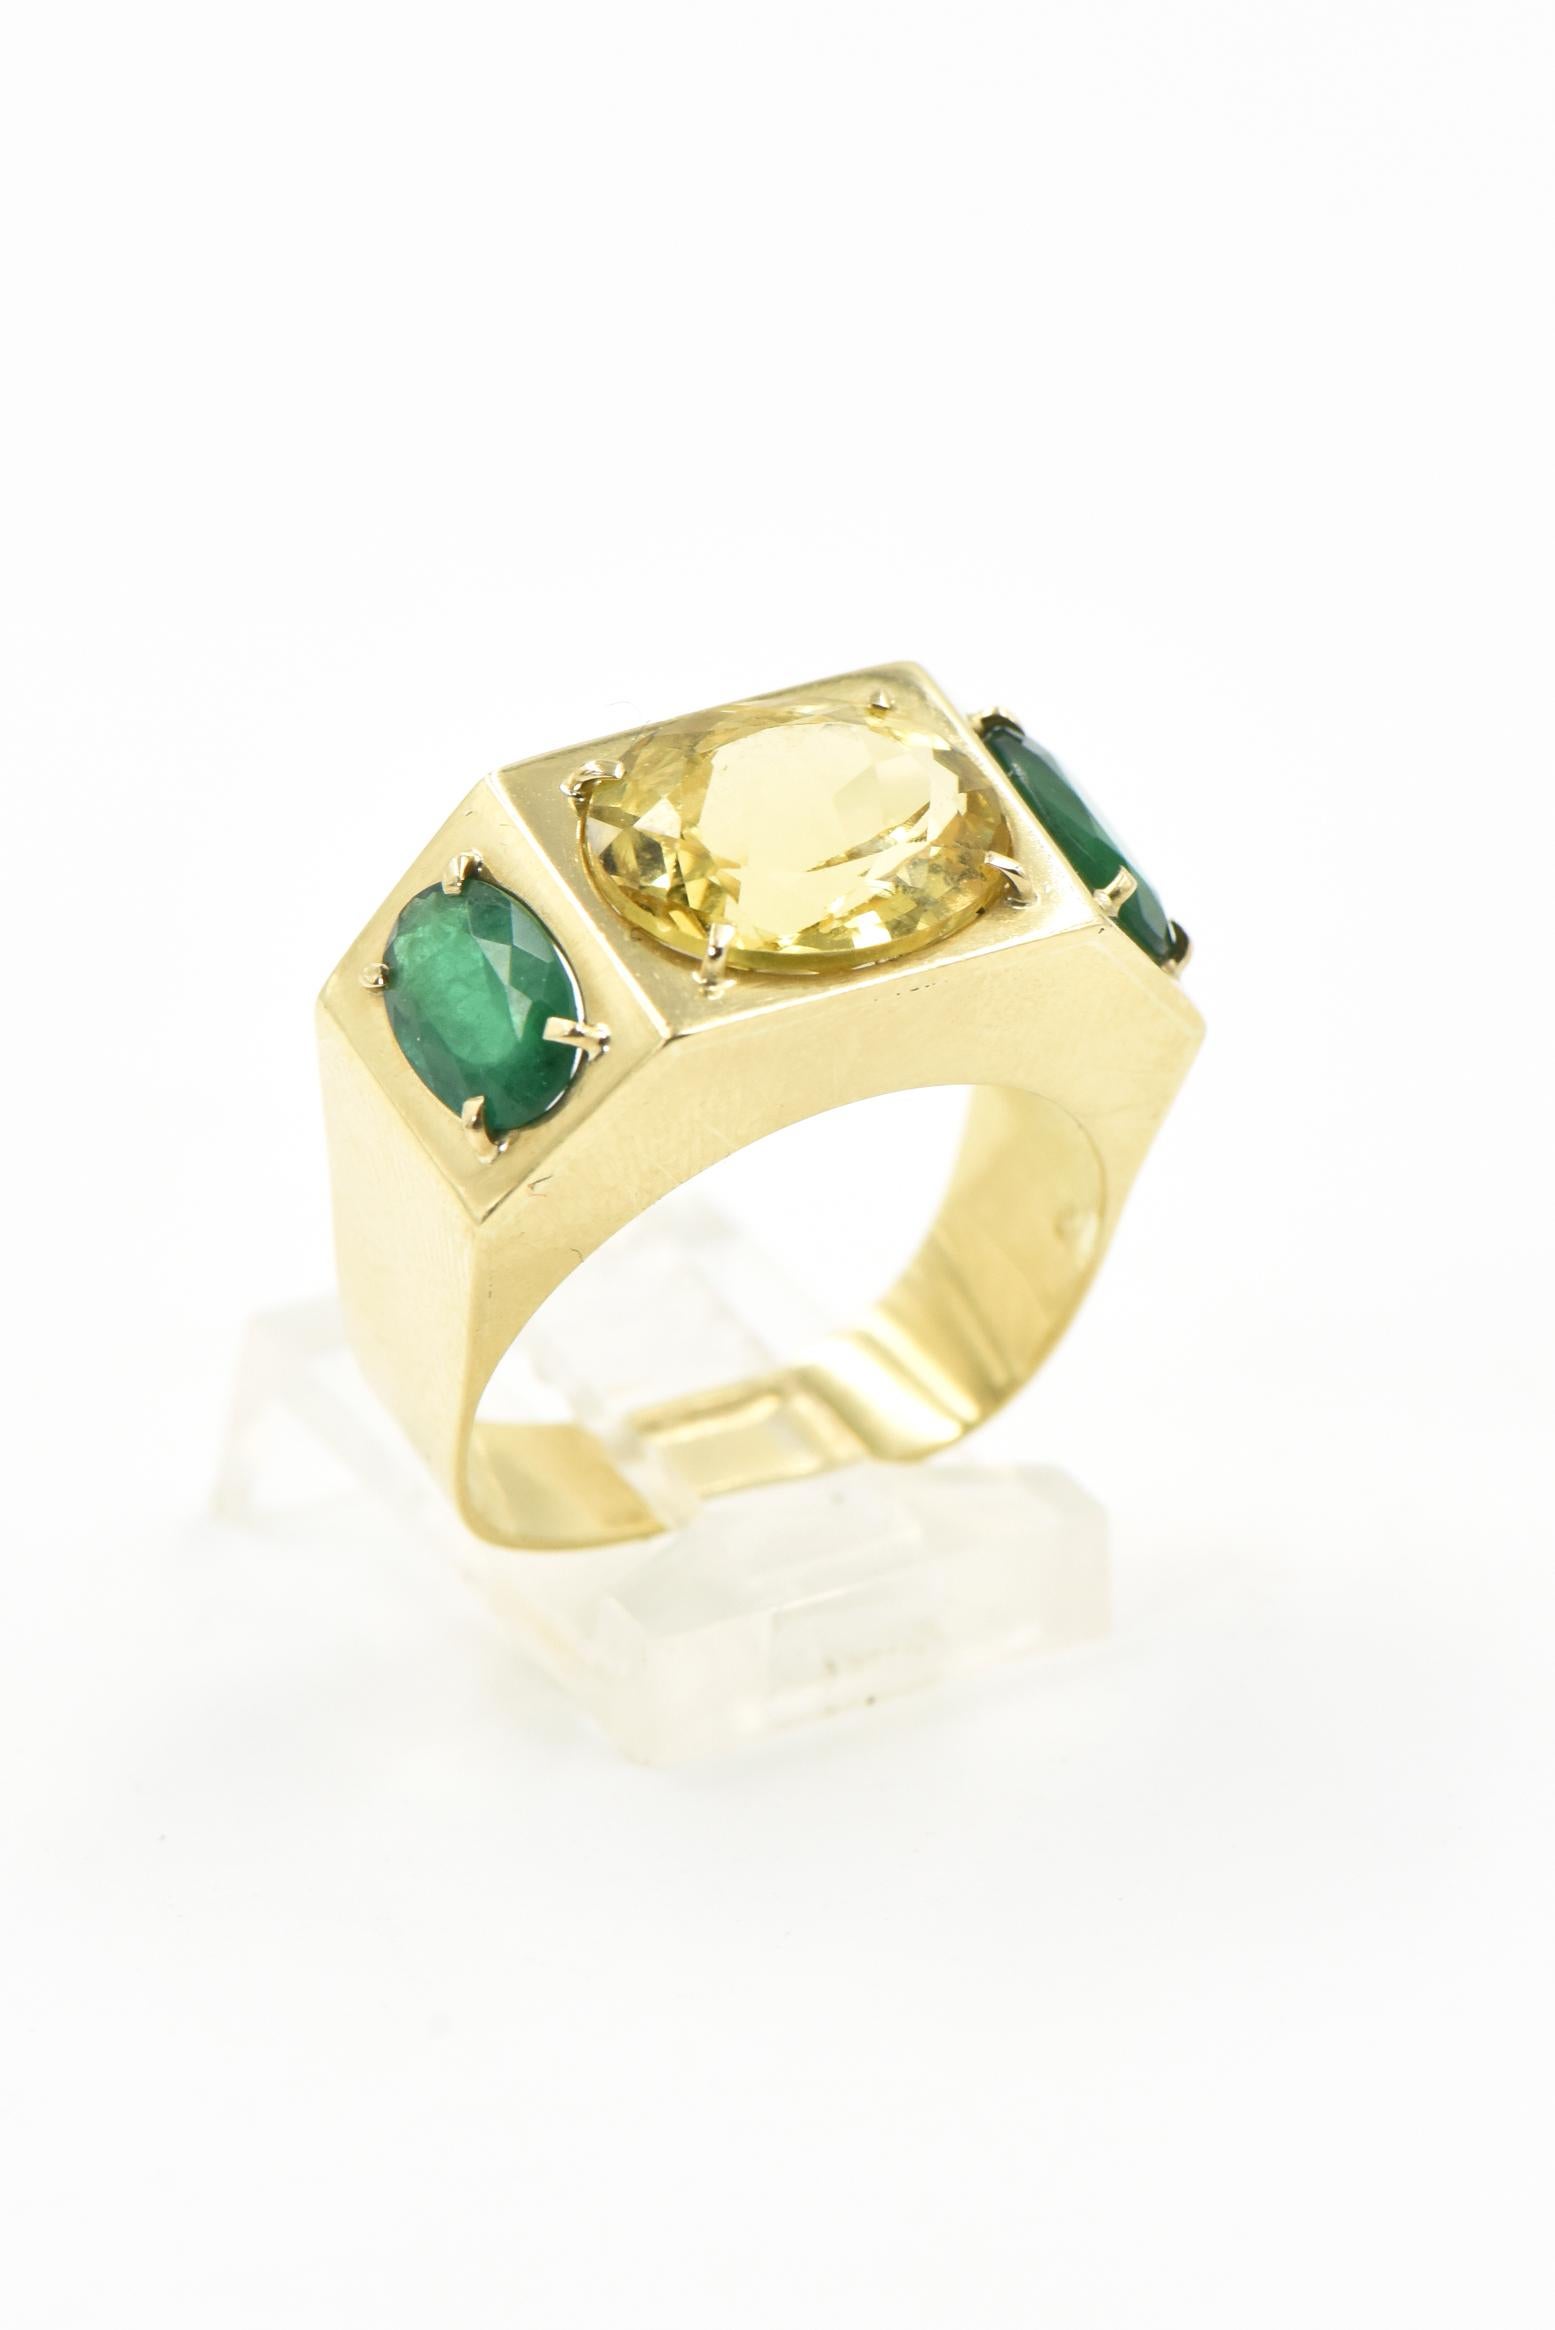 Elegant 3 stone ring featuring a prong set faceted oval citrine approximately 4 carats set east to west.  On either side, prong set north to south is an emerald that weights approximately .90 carat each.  The three stones are mounted in a